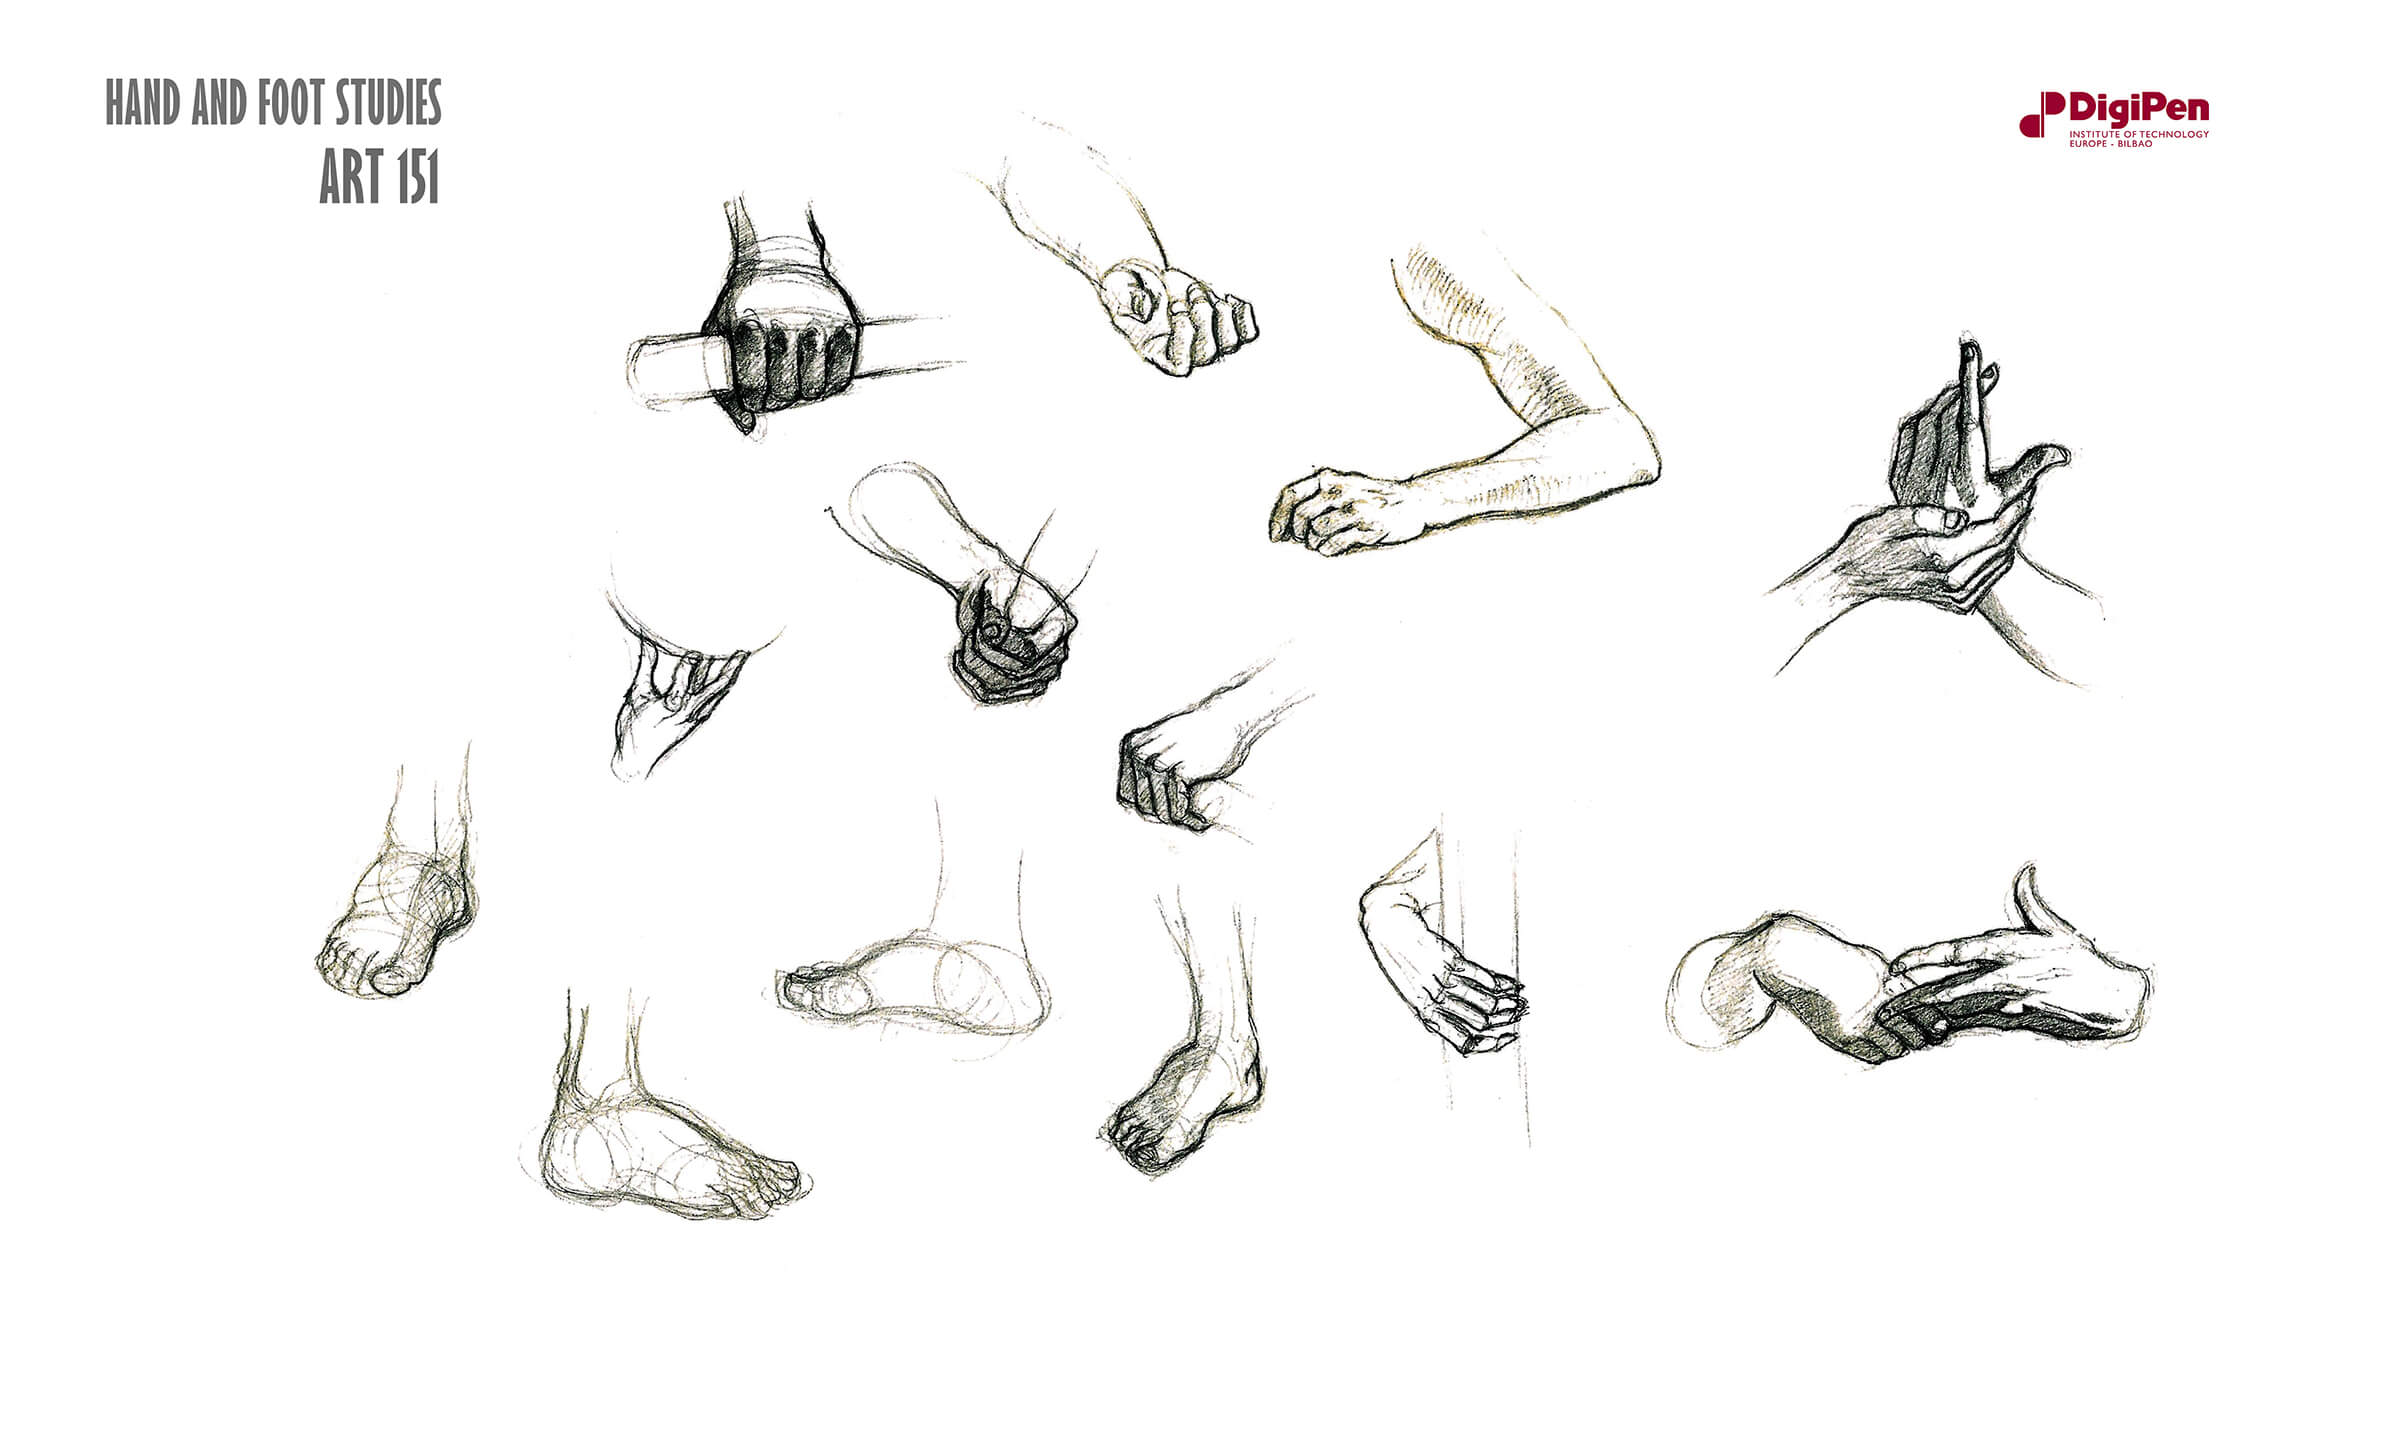 Black-and-white sketches of hands, arms, and feet in different poses, grasping and extending.